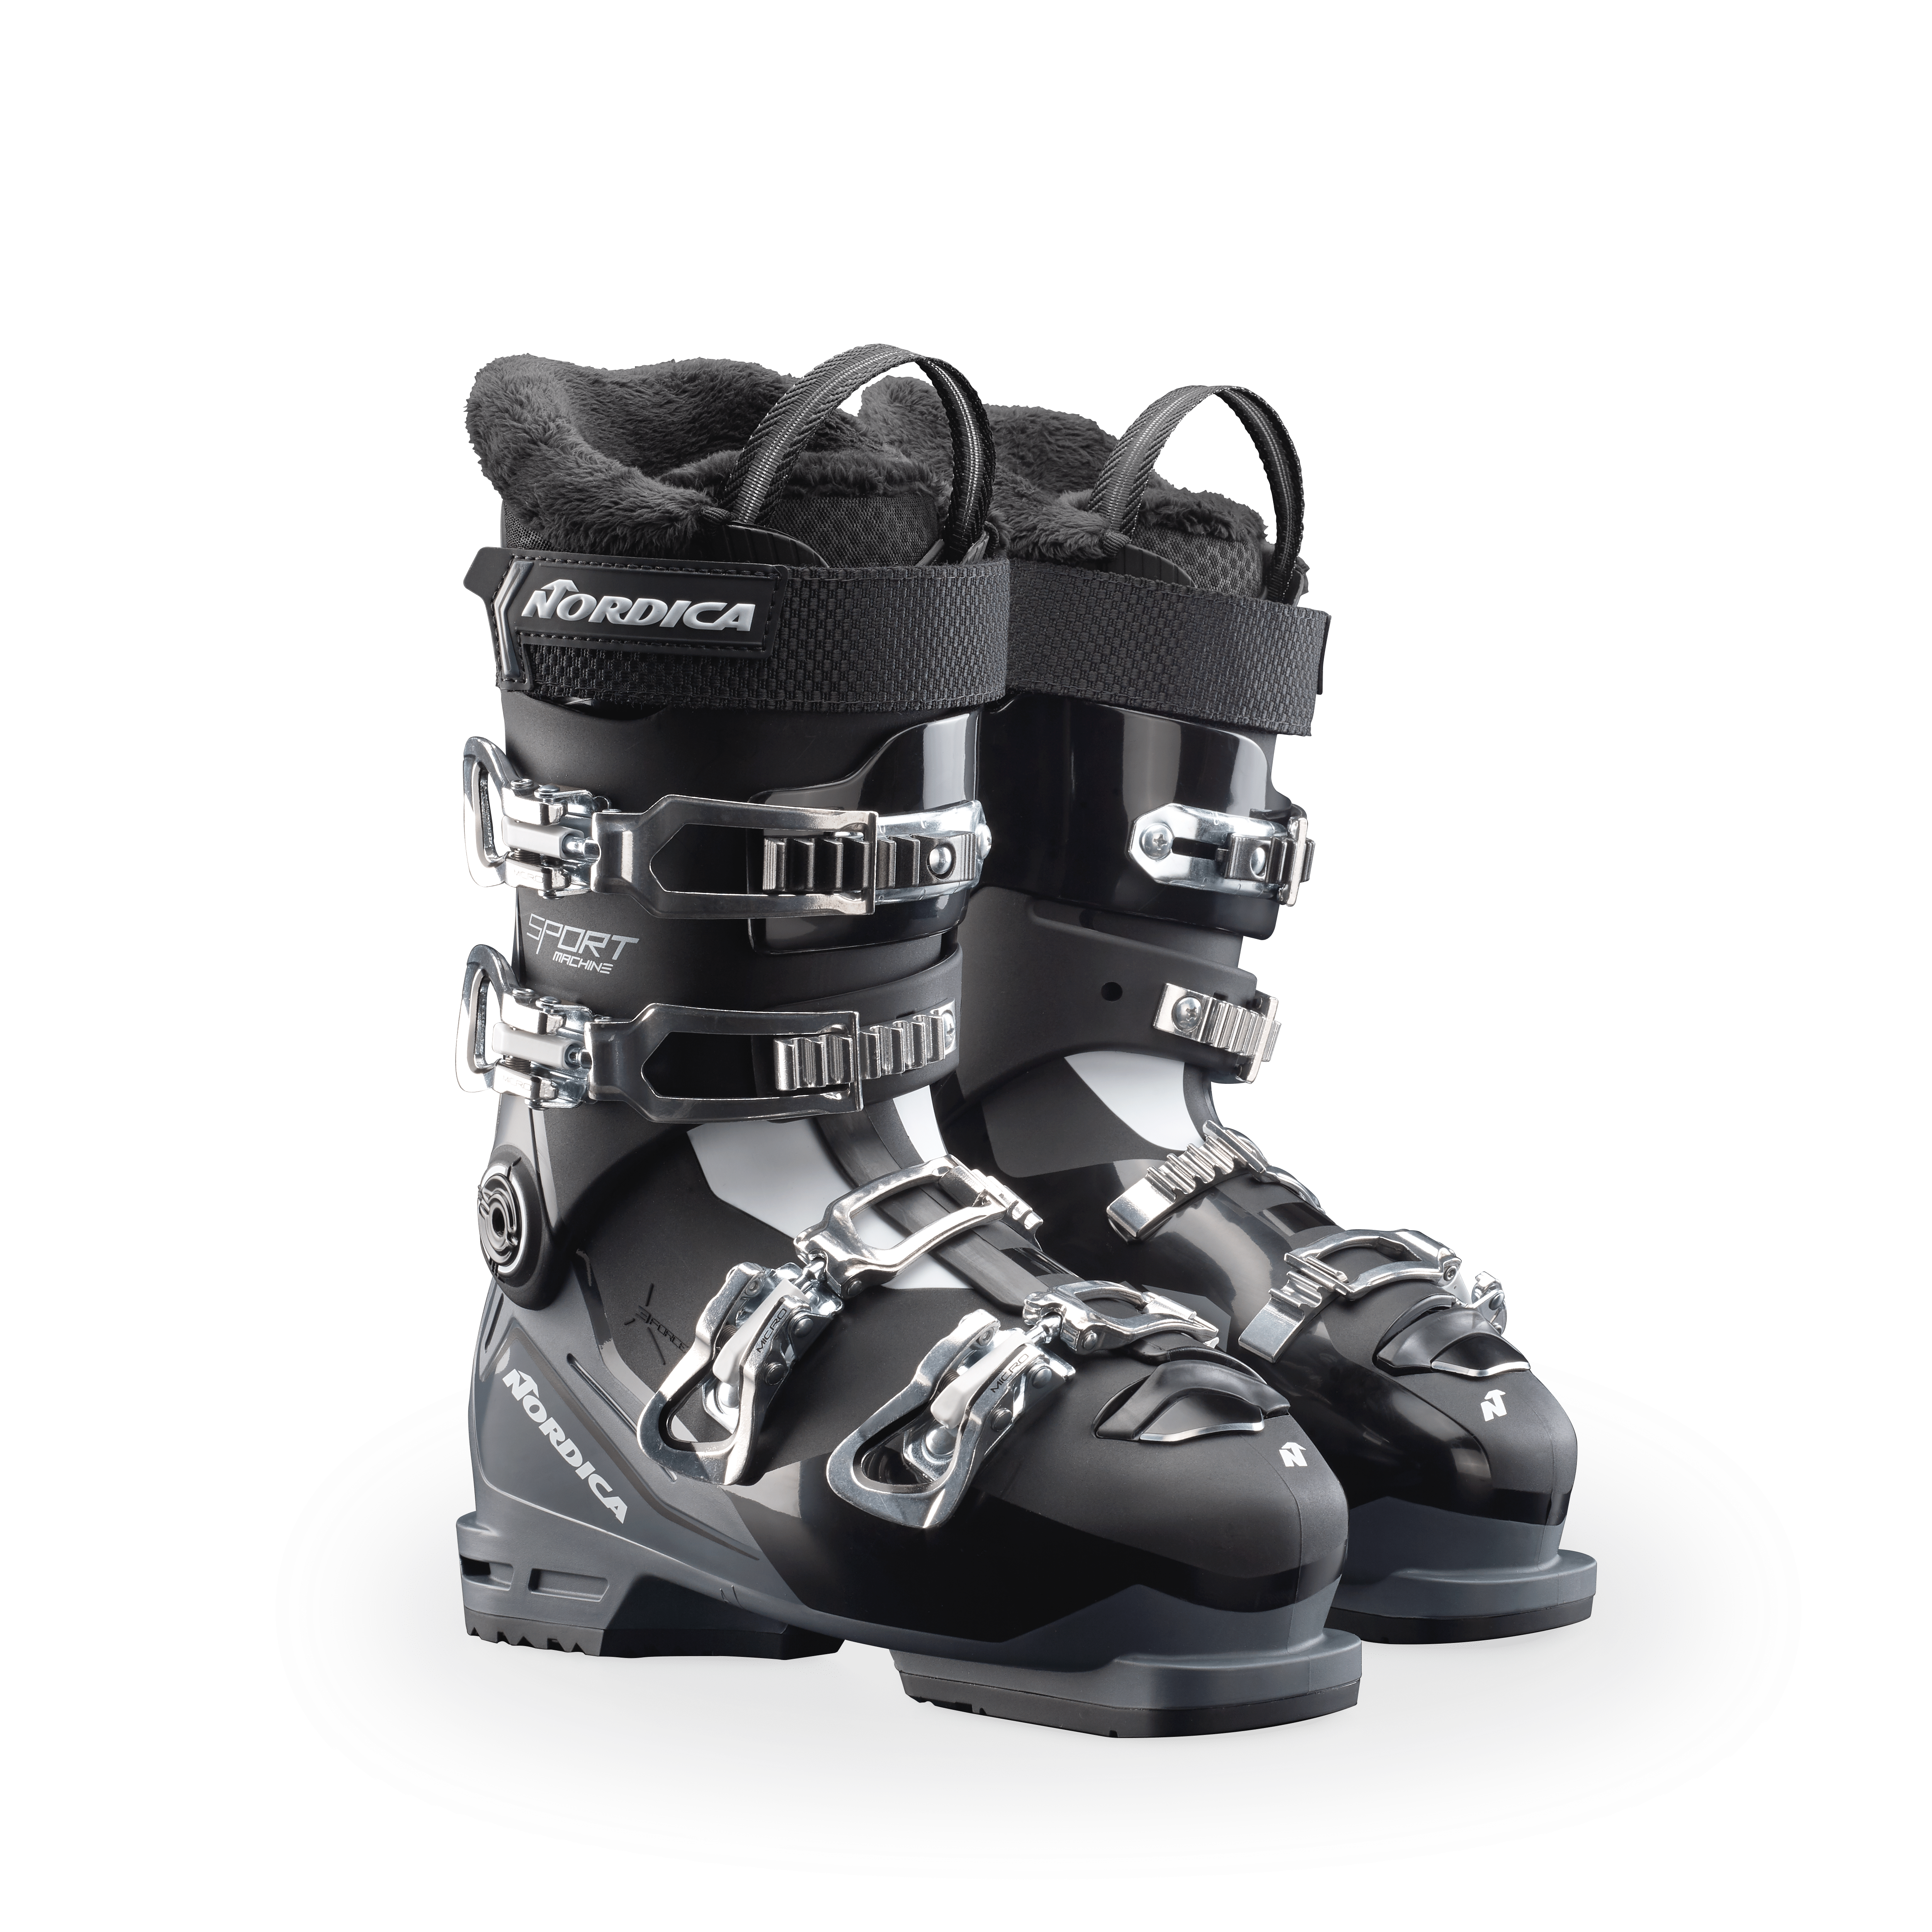 SPORTMACHINE 3 65 W Nordica - Skis and Boots – Official website